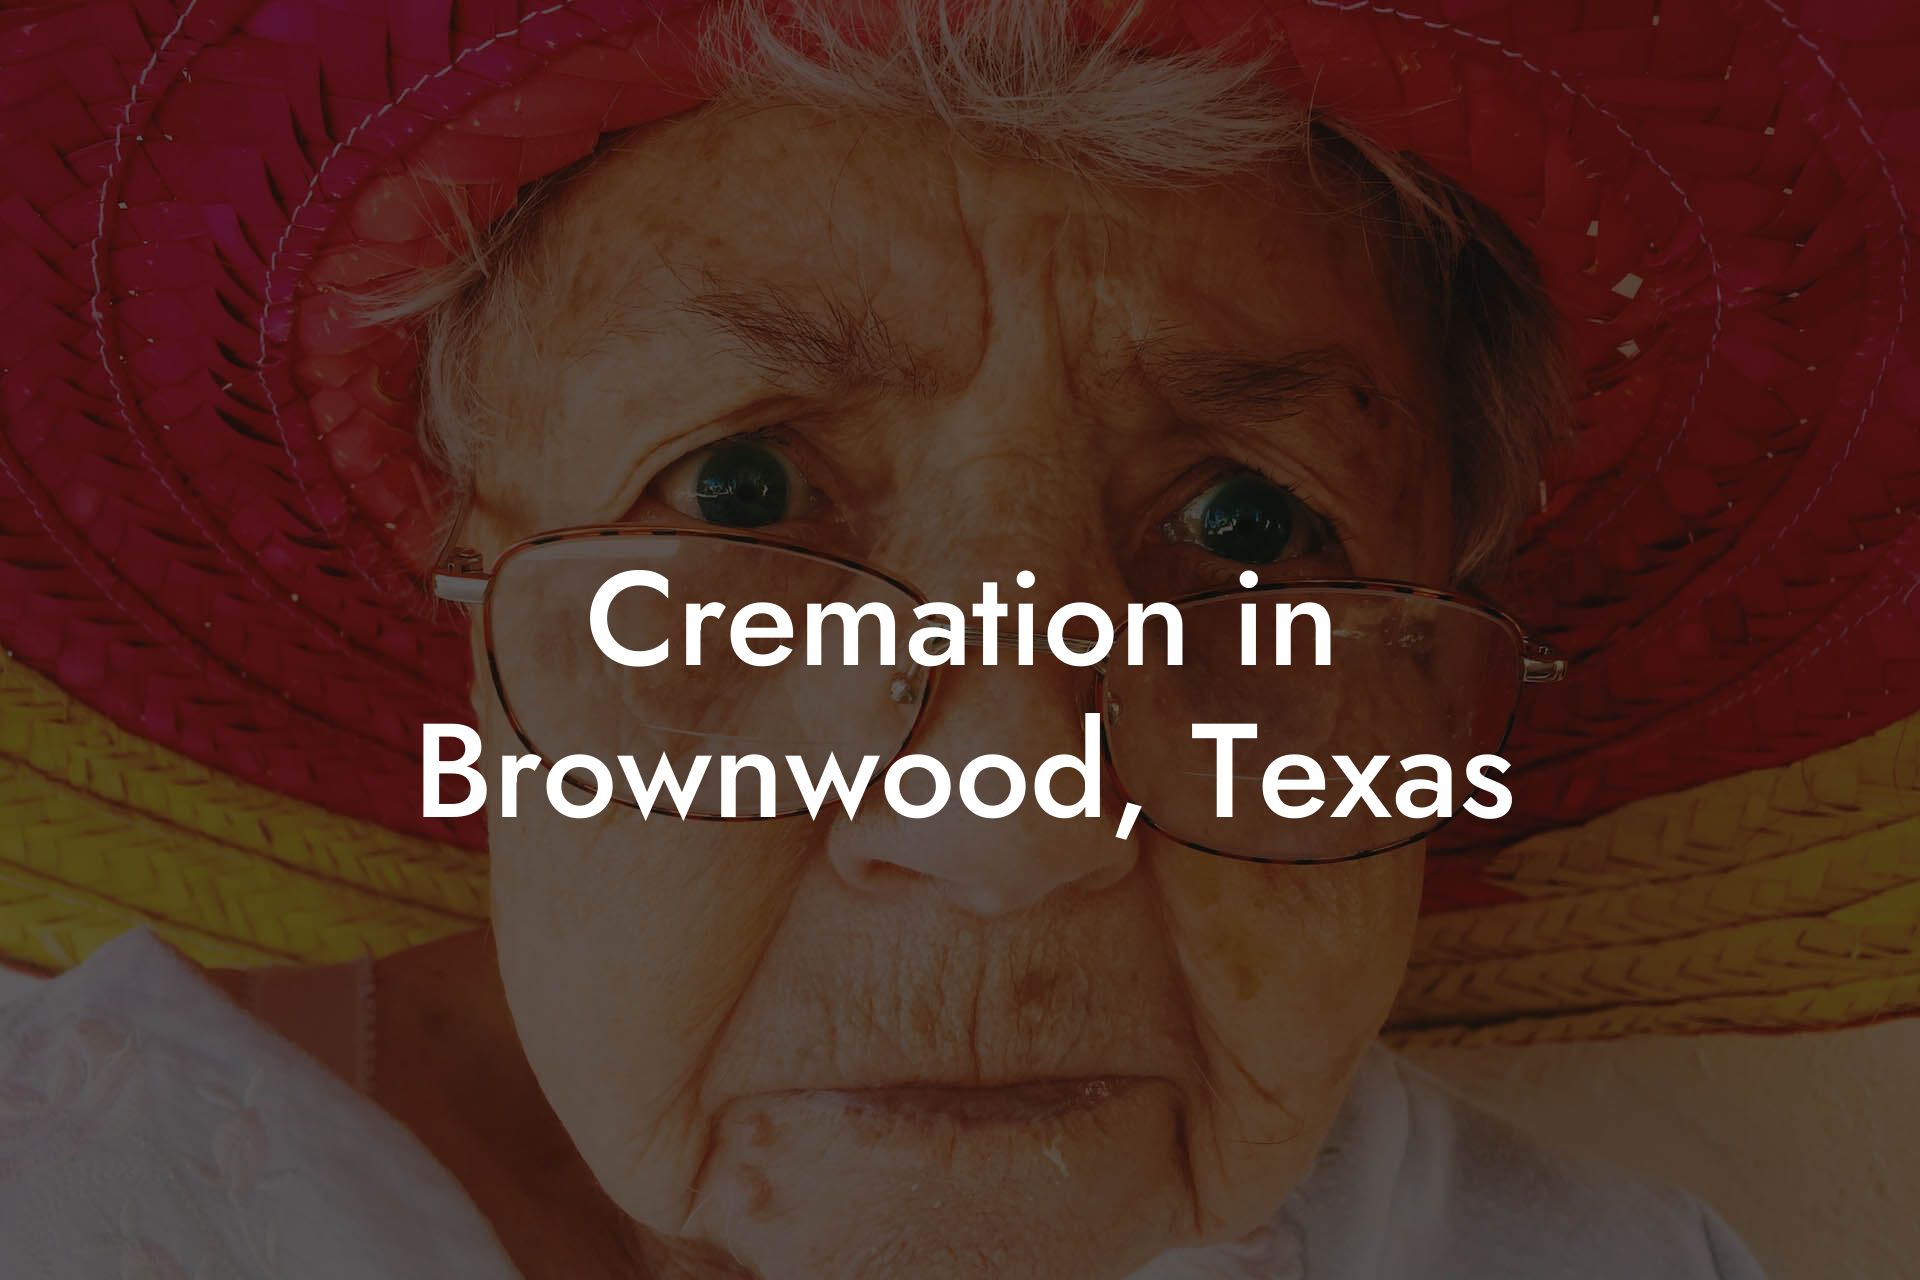 Cremation in Brownwood, Texas